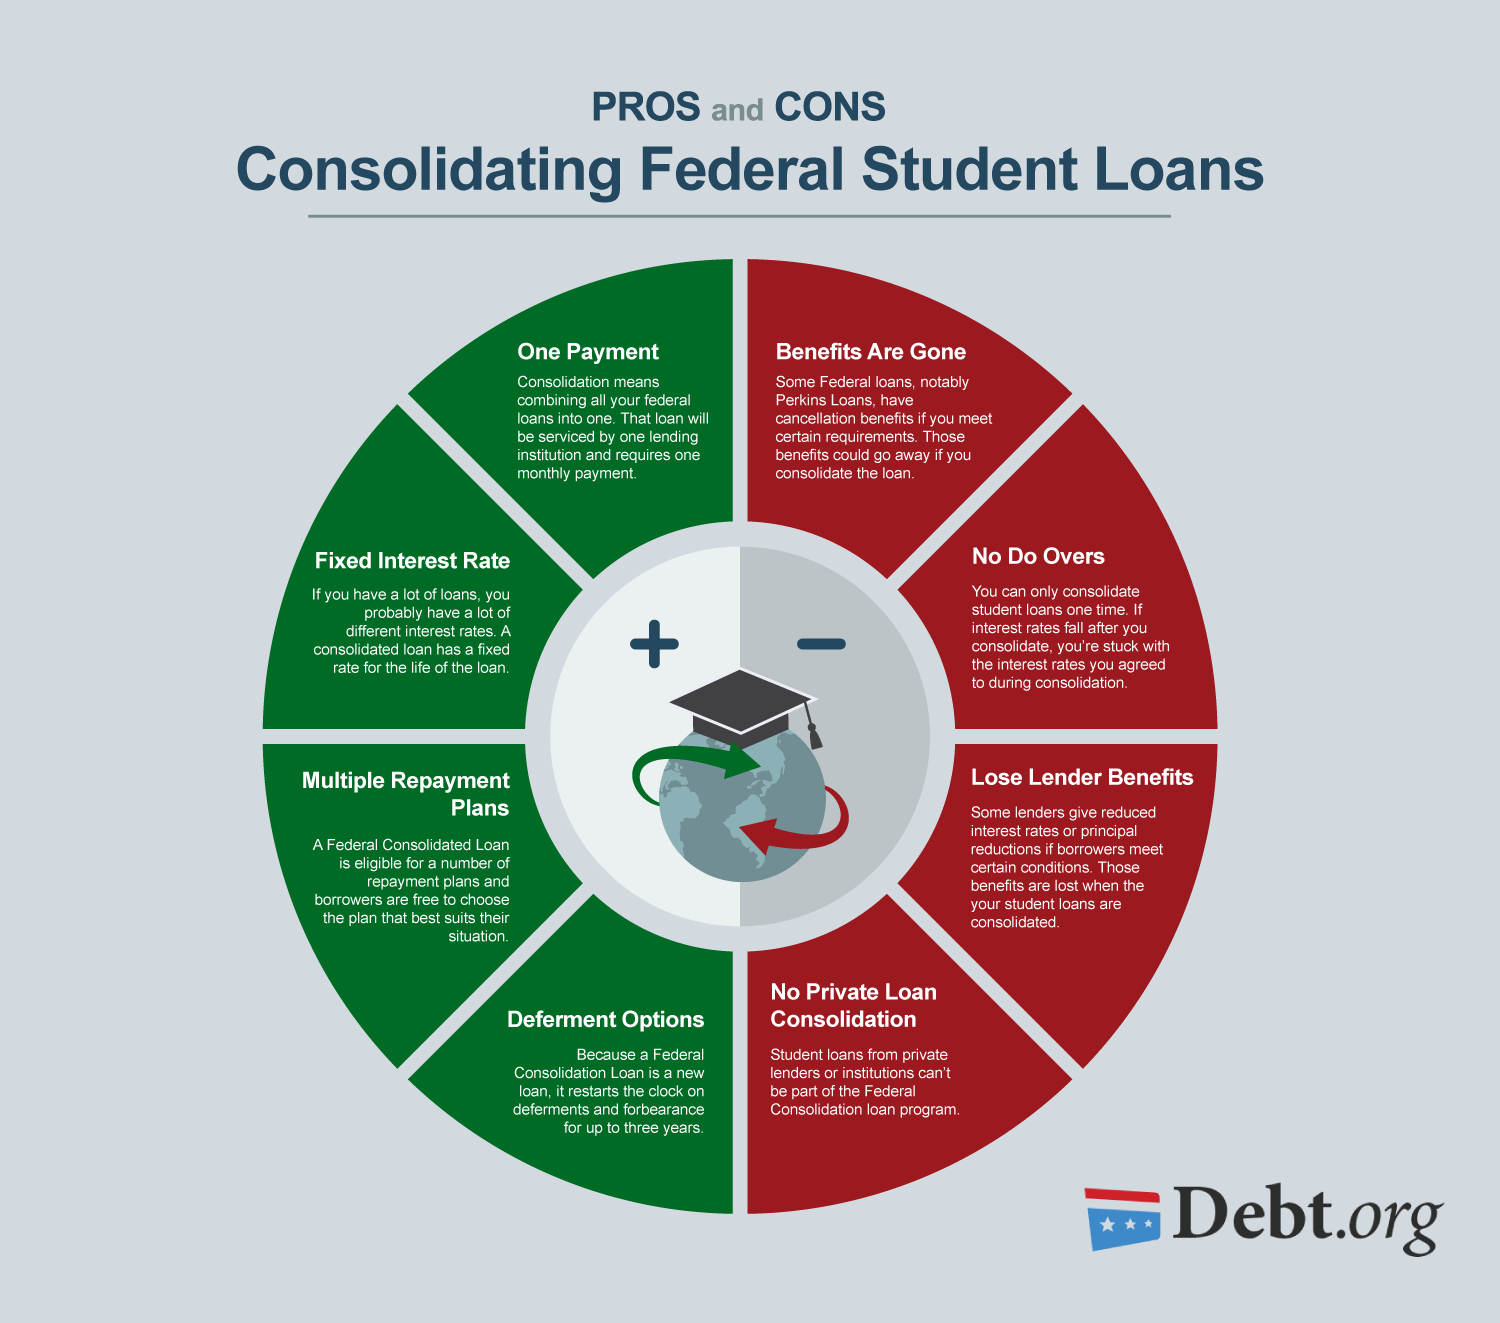 Can You Consolidate Private Student Loans While In School